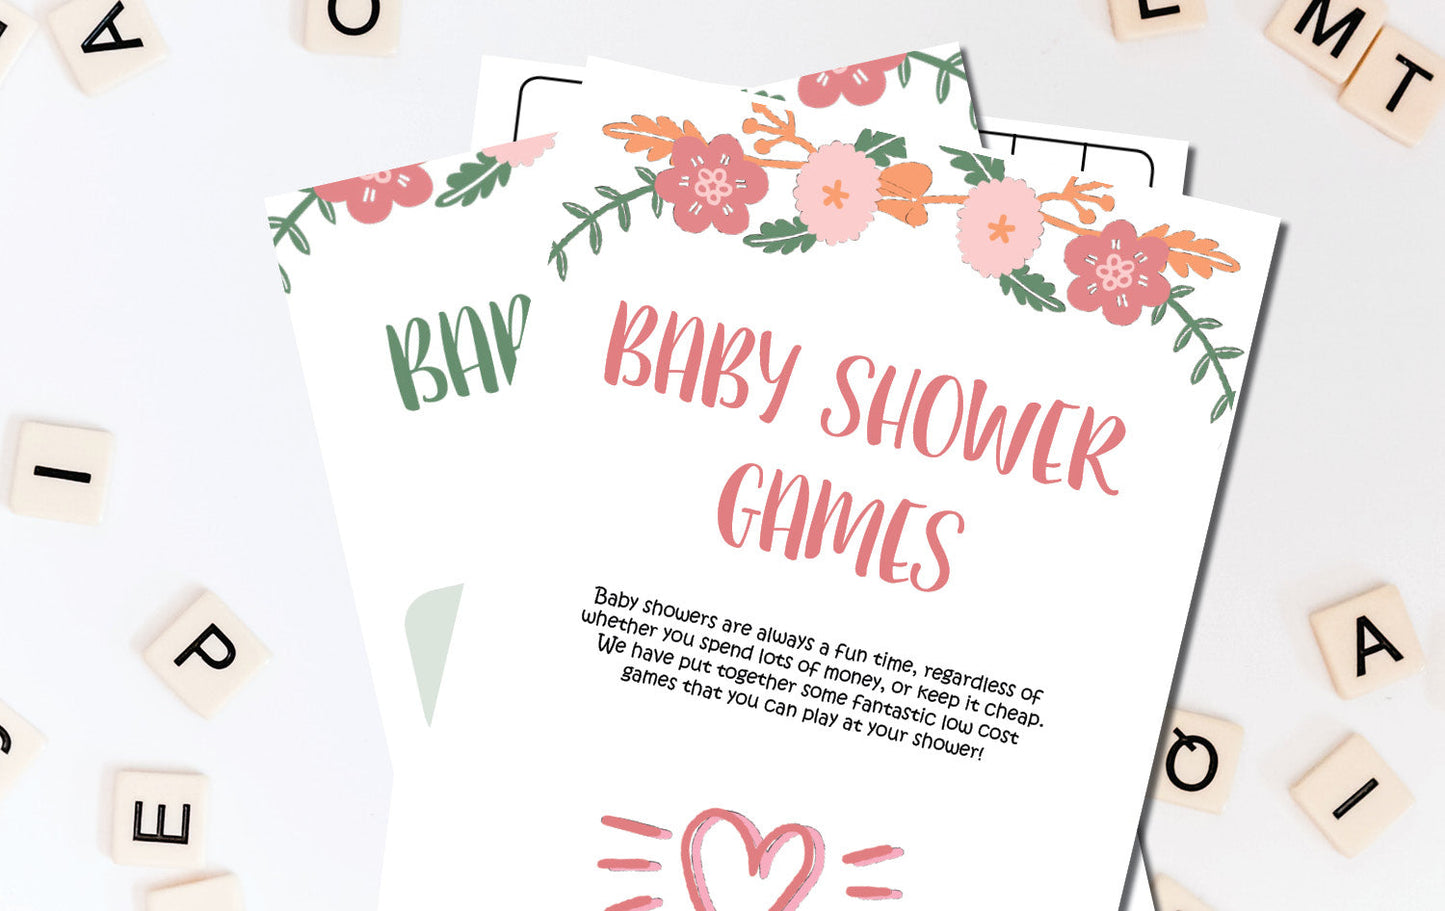 Baby Shower Games - Brolly Sheets NZ